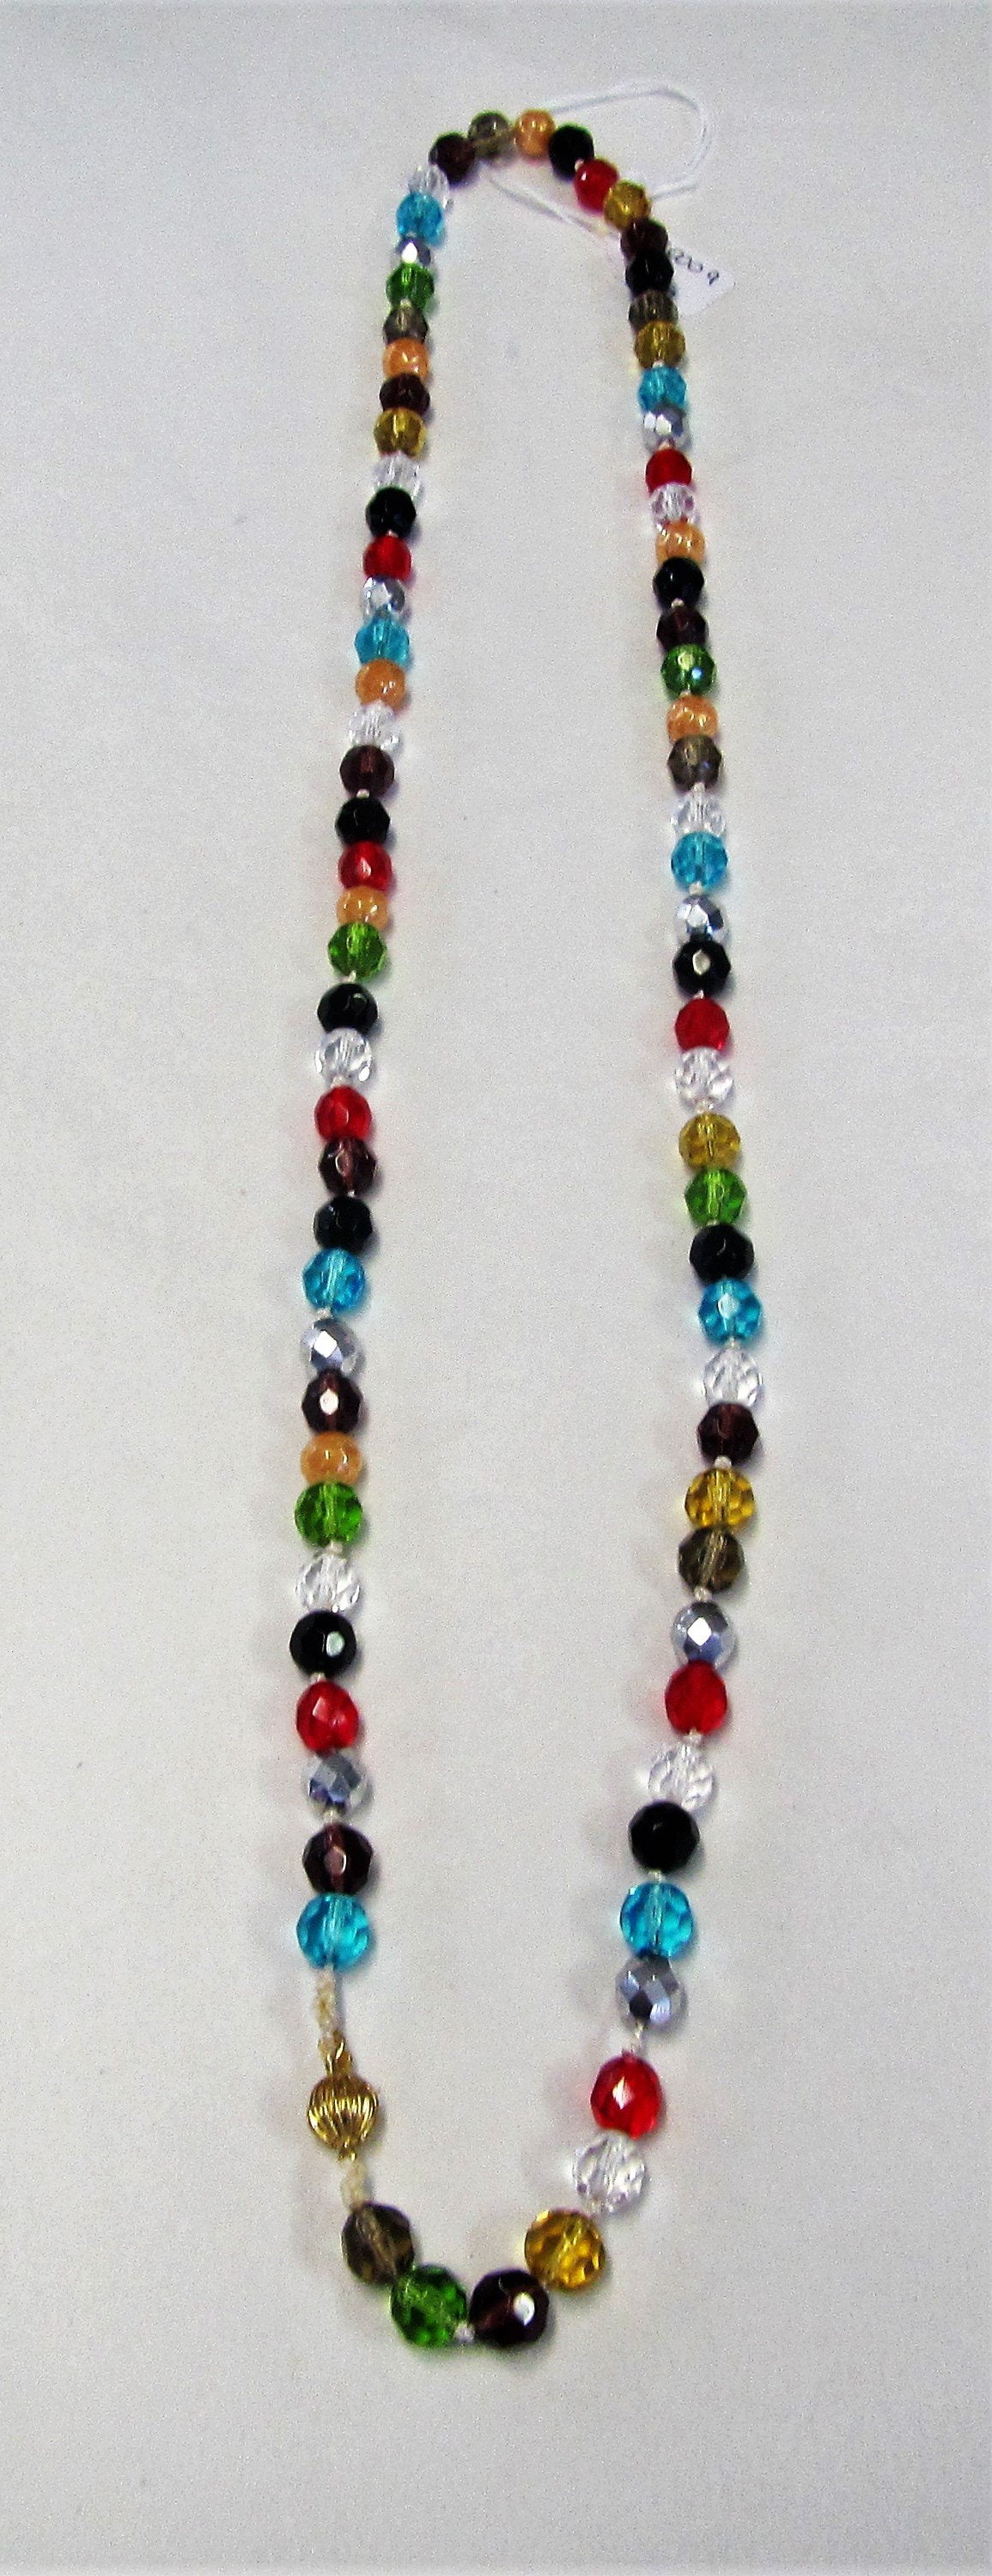 Handcrafted multi coloured beaded necklace